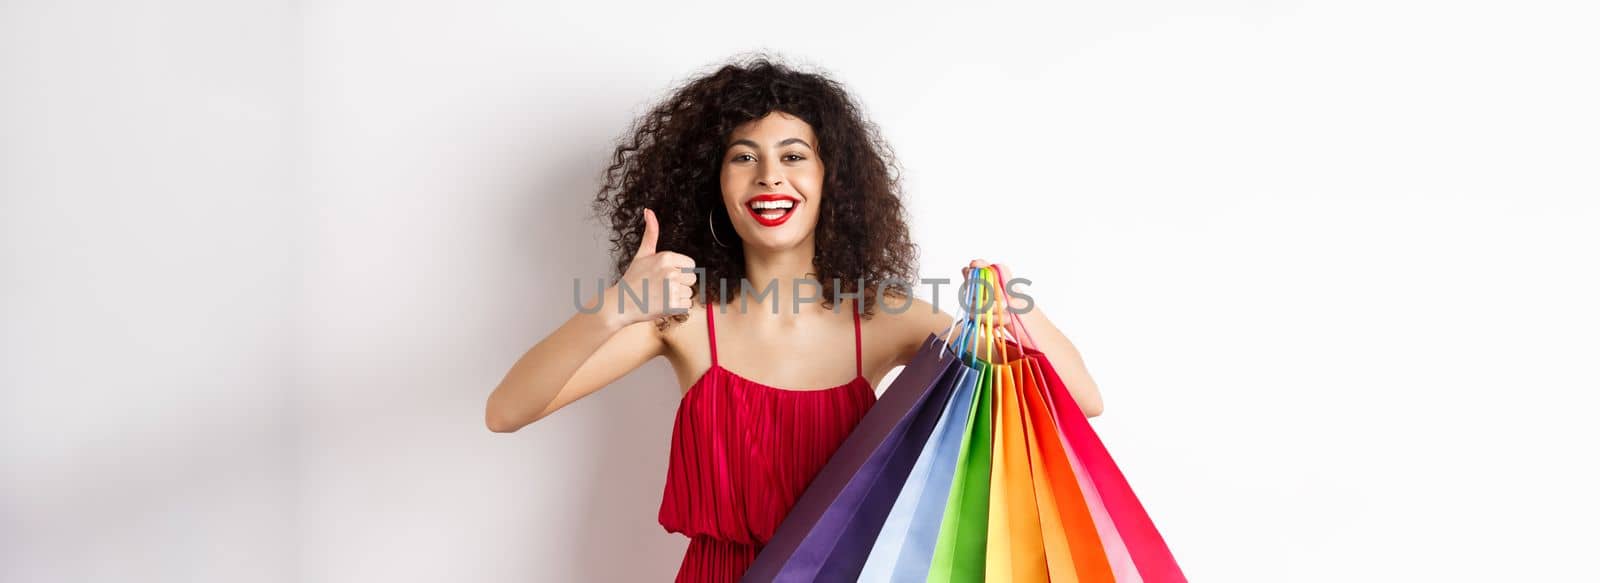 Fashionable woman in red dress going shopping, holding bags and showing thumbs up, recommend store, standing on white background.